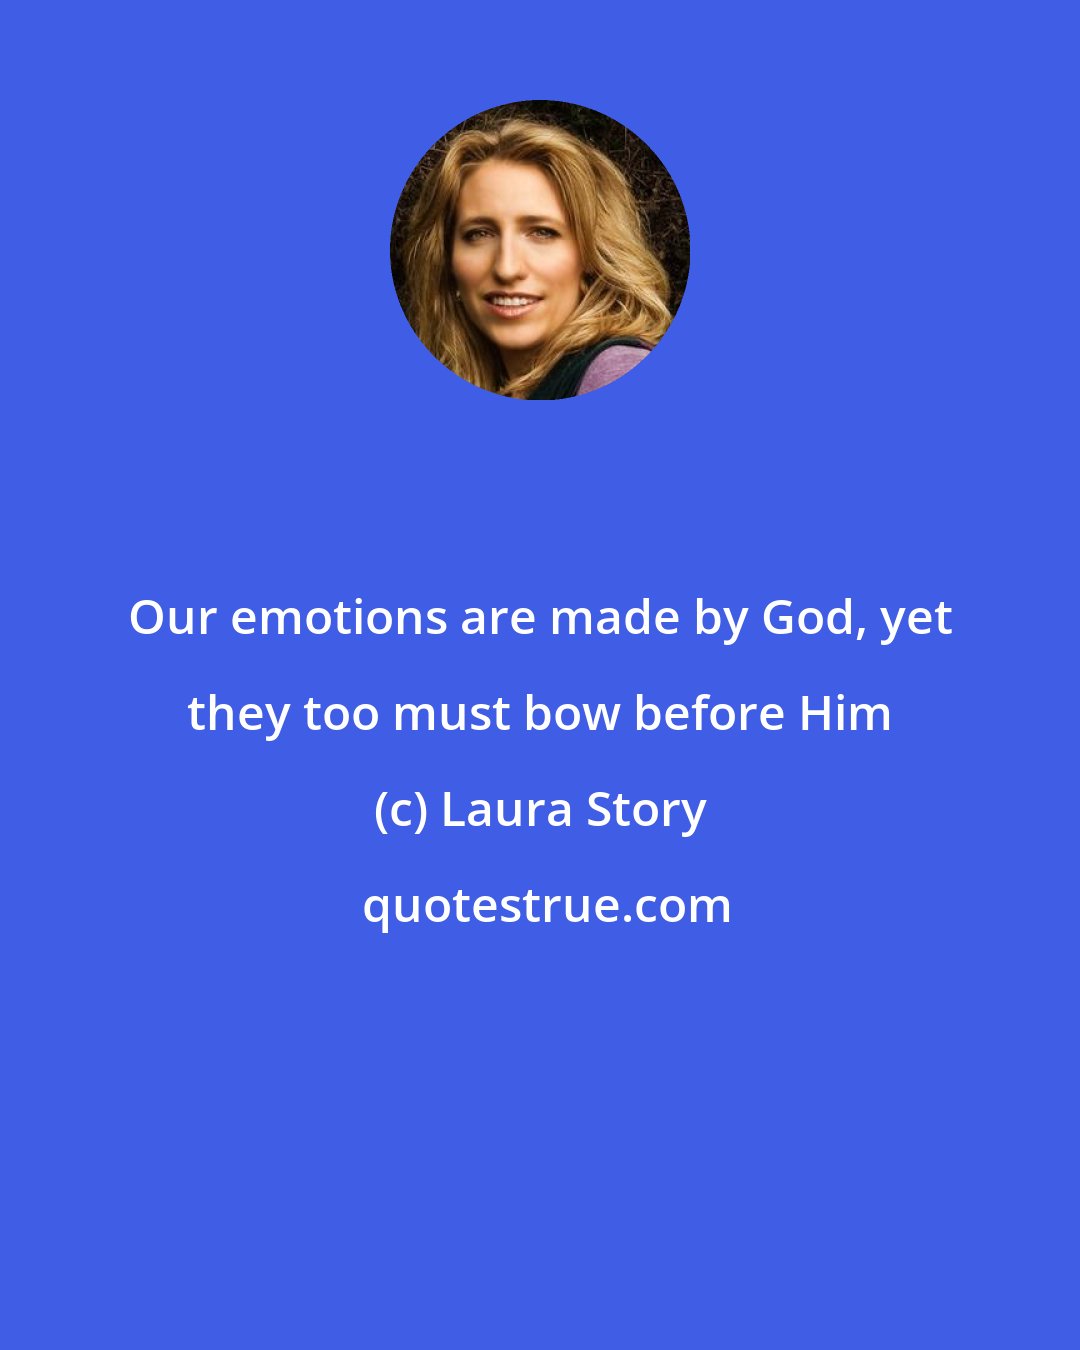 Laura Story: Our emotions are made by God, yet they too must bow before Him